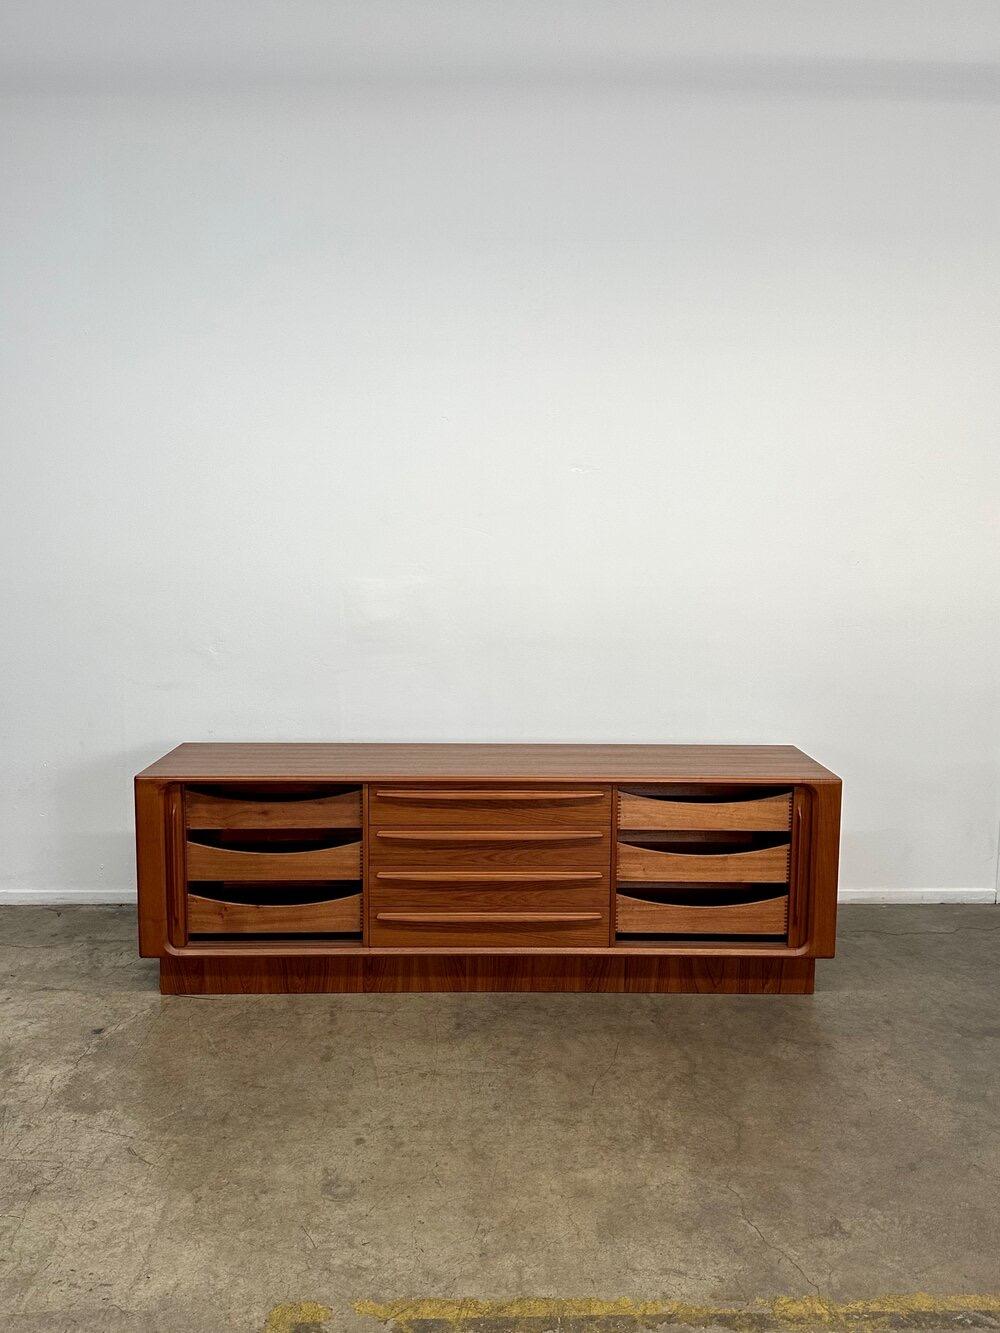 Structurally sound and sturdy teak tambour credenza. Item is most likely by Dyrlund but no manufacture tags were found. This credenza was recently refinished by previous owners and shows in excellent condition. Tambour doors and drawers slide smooth.